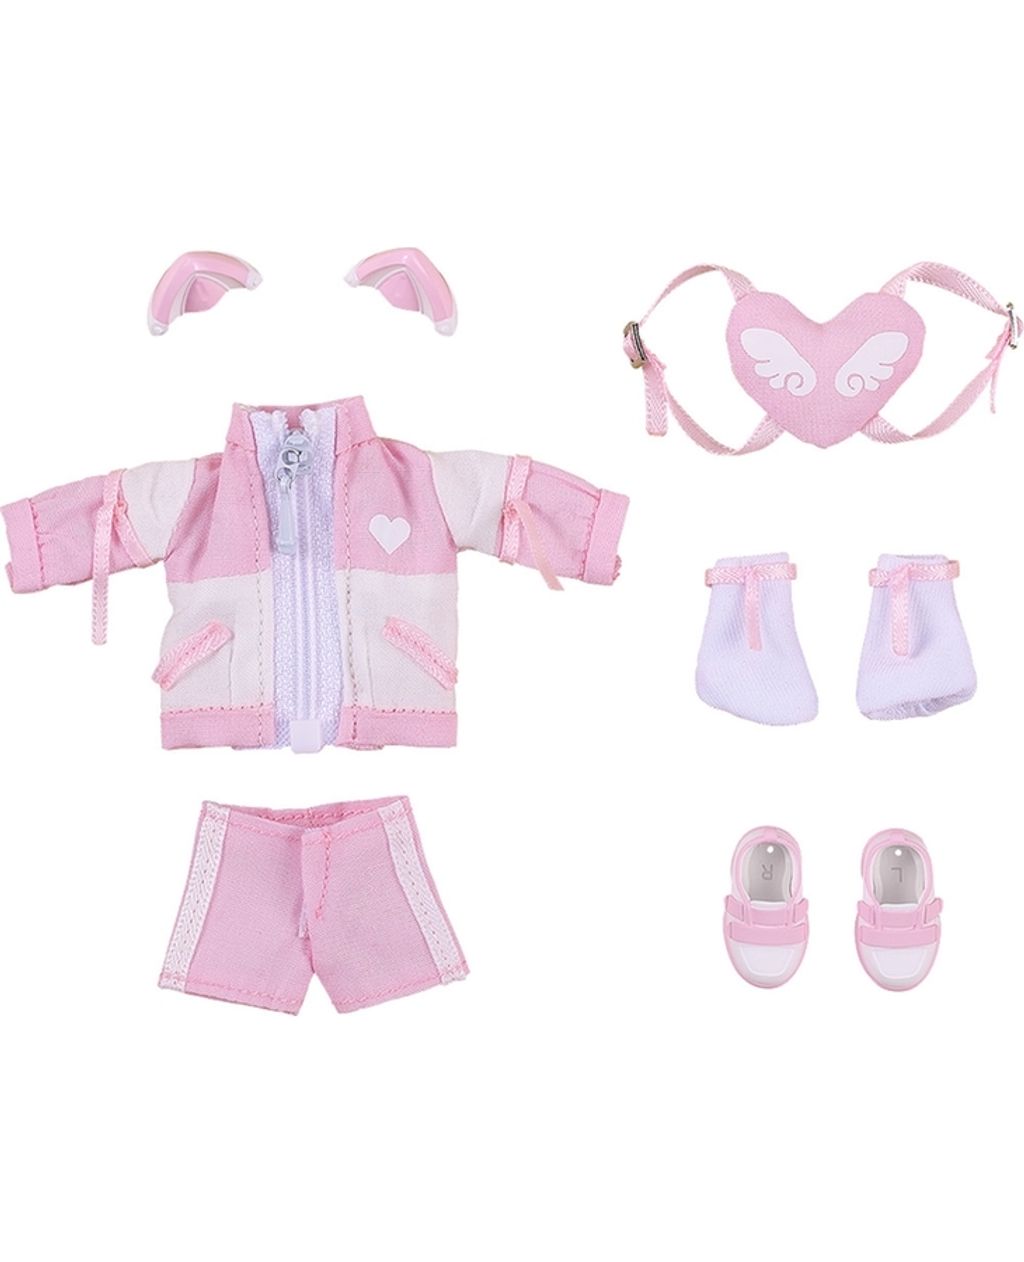 Nendoroid Doll Outfit Set- Subculture Fashion Tracksuit (Pink)